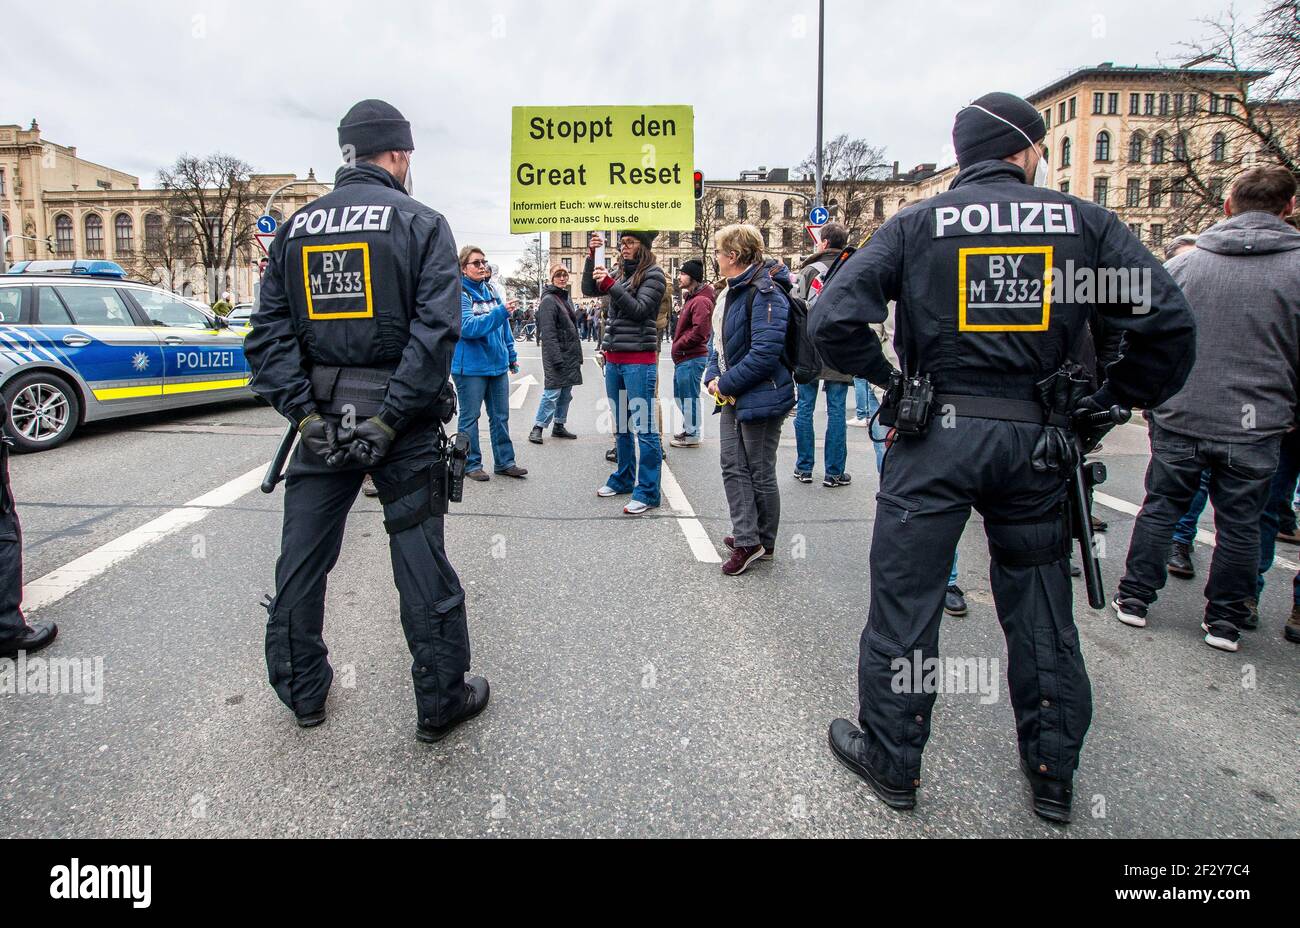 Munich, Bavaria, Germany. 13th Mar, 2021. A sign of the conspiracy ''The Great Reset'' being displayed at police in Munich, Germany. Using the occasion of Germany going into a period of anti-Corona measures approximately one year ago, Corona deniers and anti-maskers led by Querdenken's Markus Haintz assembled at Munich's Marienplatz and then at the Maxmonument in an effort to protest against the Bavarian Landtag and promote their initiative to dissolve it and install a provisional government, presumably made of right-extremists, conspiracy theorists, QAnons, Libertarians, and anti-masker Stock Photo